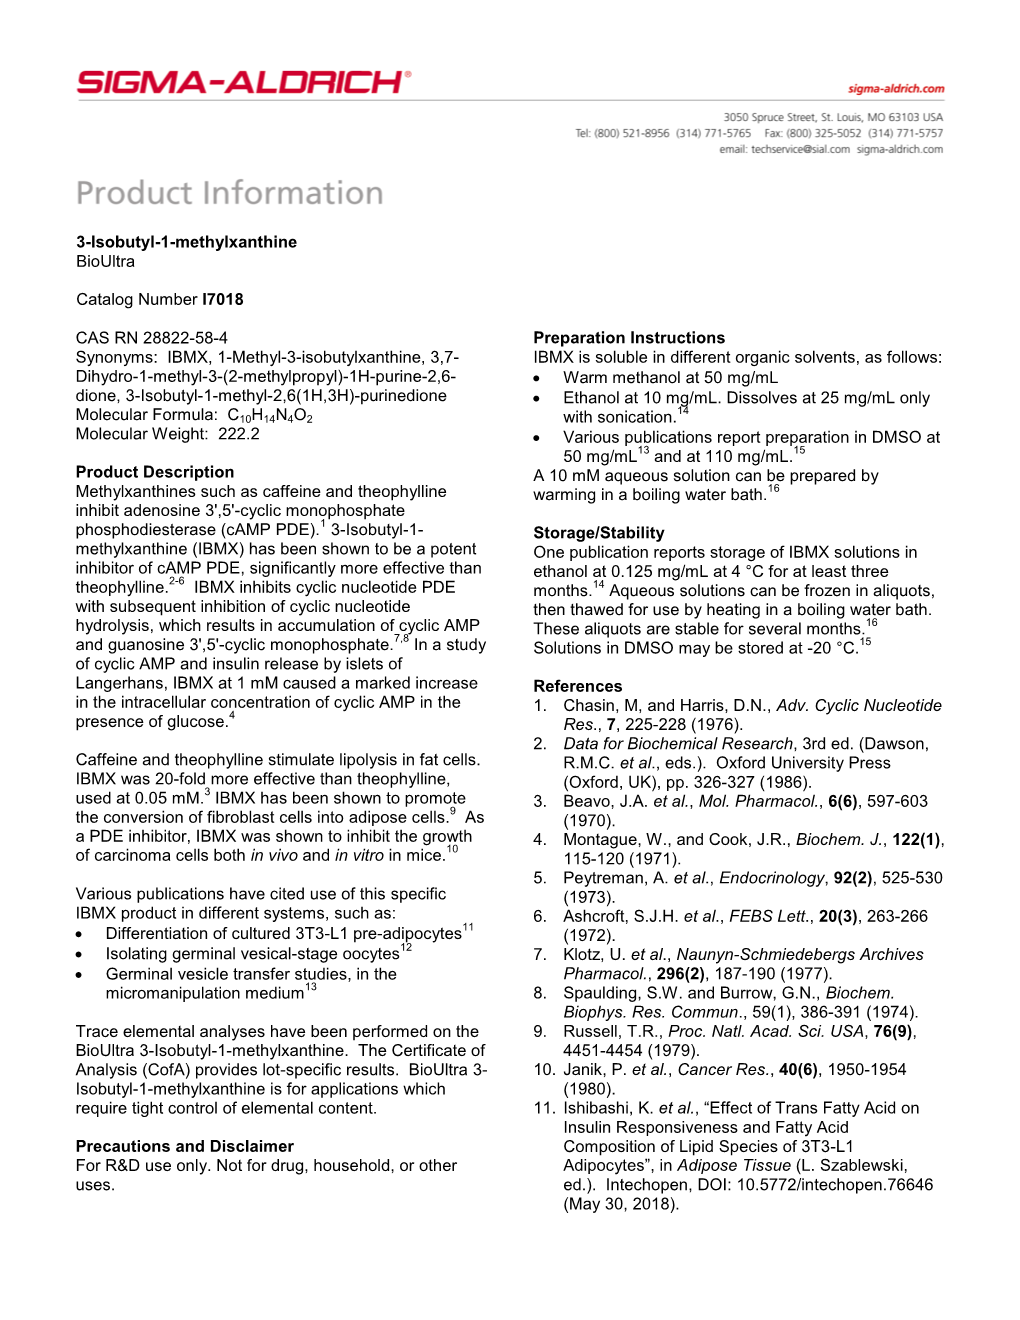 Product Information Sheet